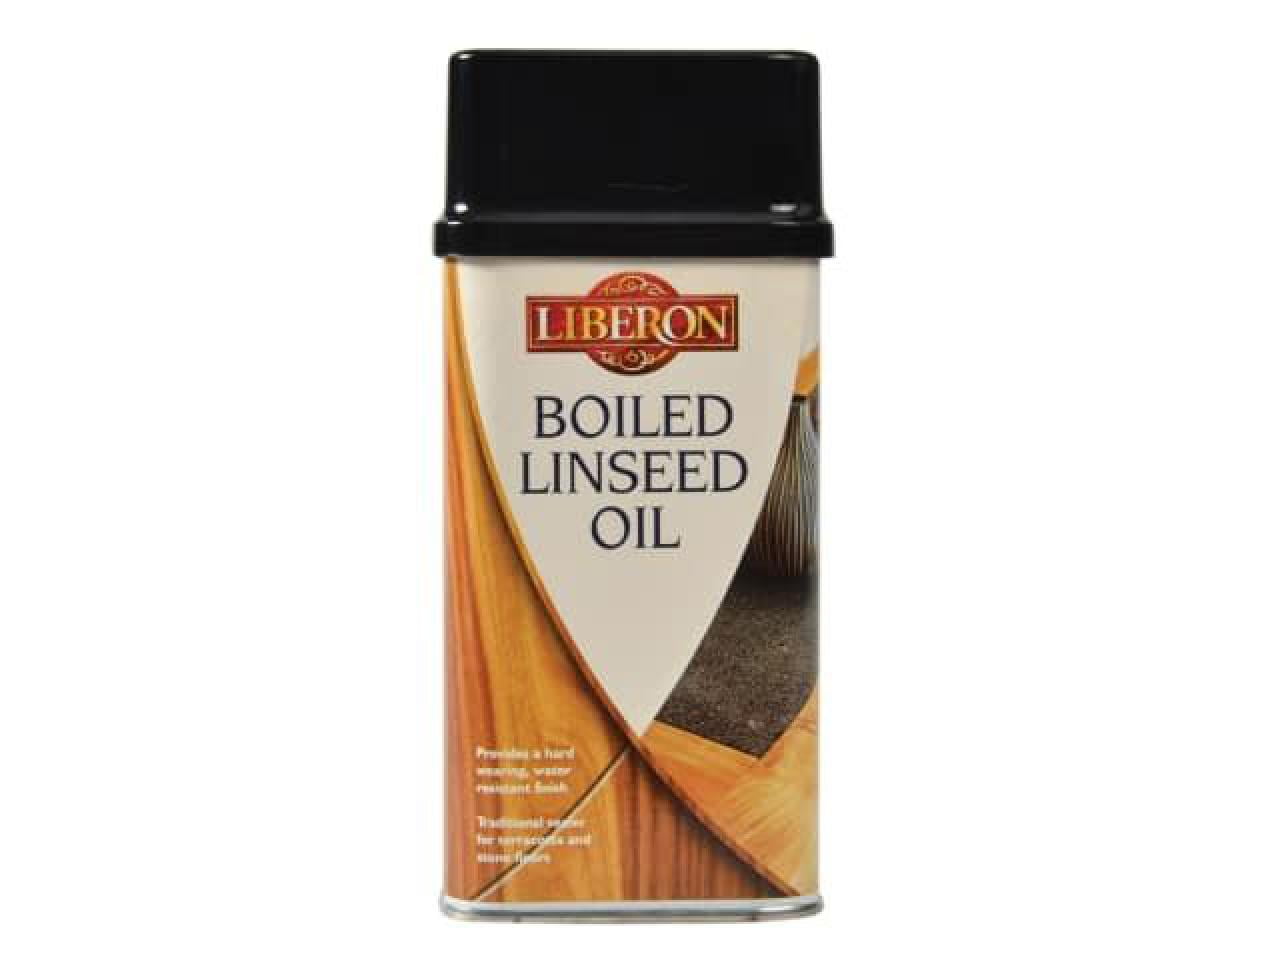 Liberon Boiled Linseed Oil - Paramount-Coatings